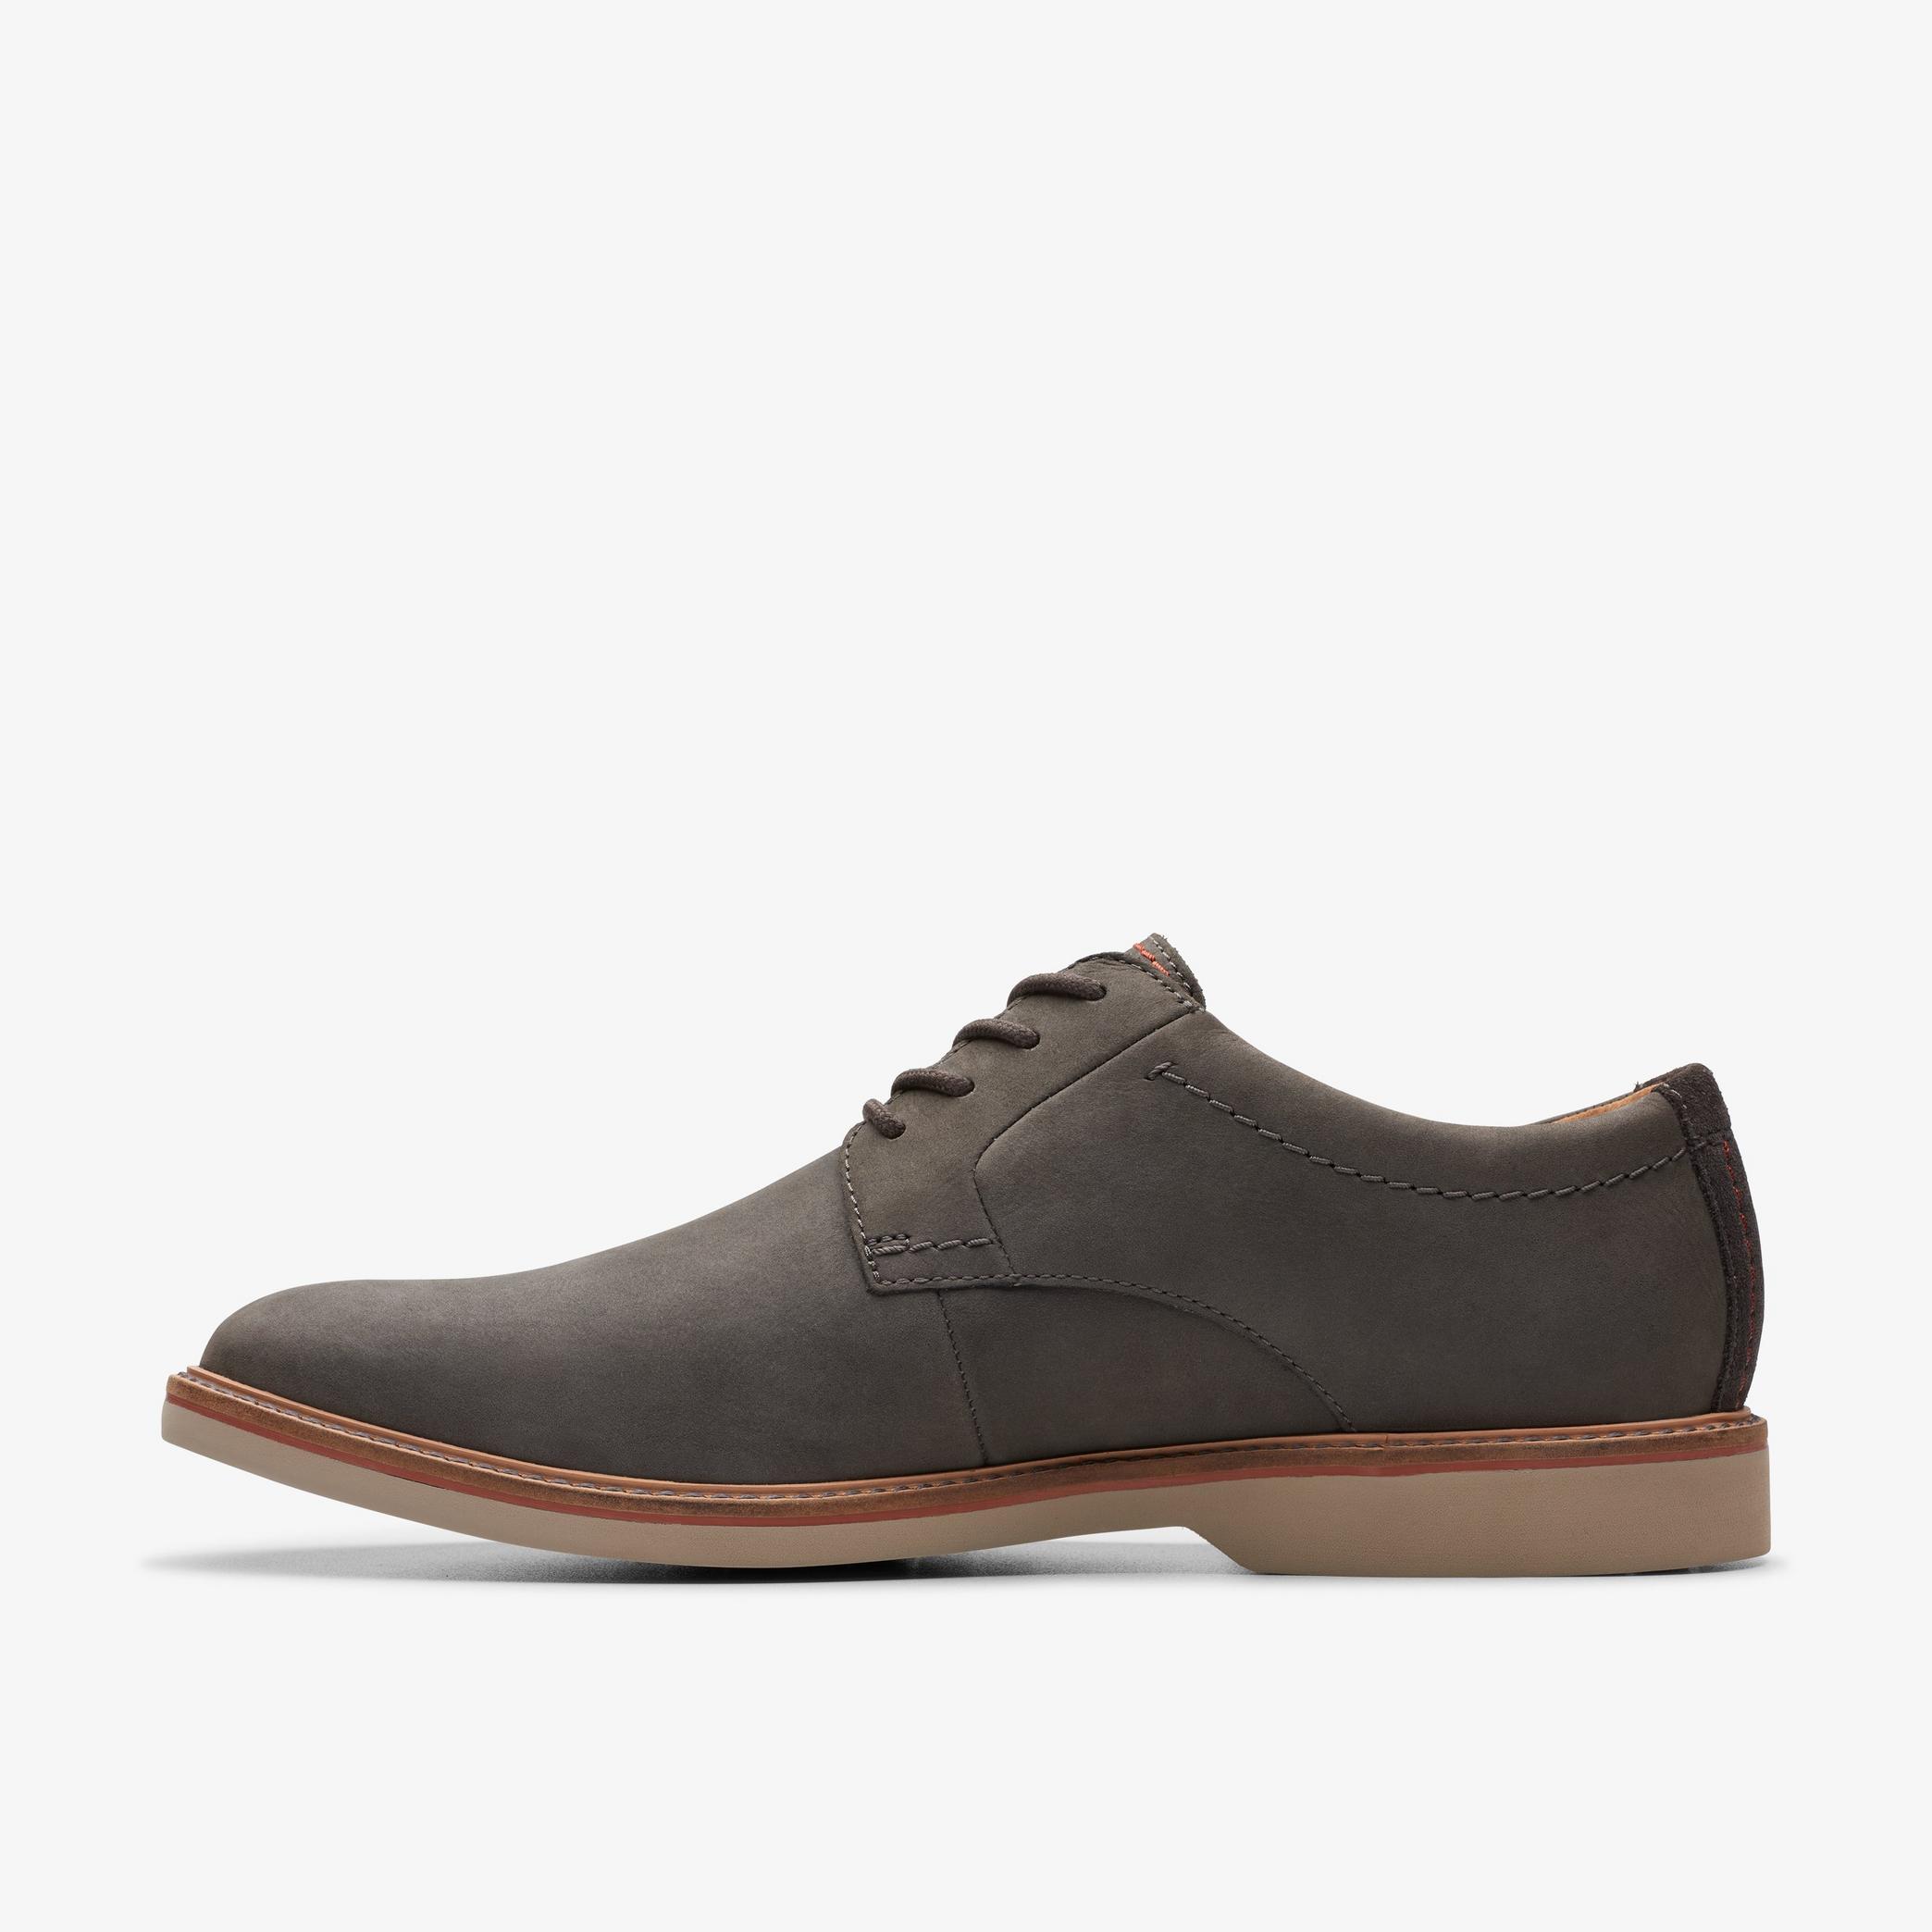 Atticus LT Lace Dark Grey Nubuck Oxford Shoes, view 2 of 6